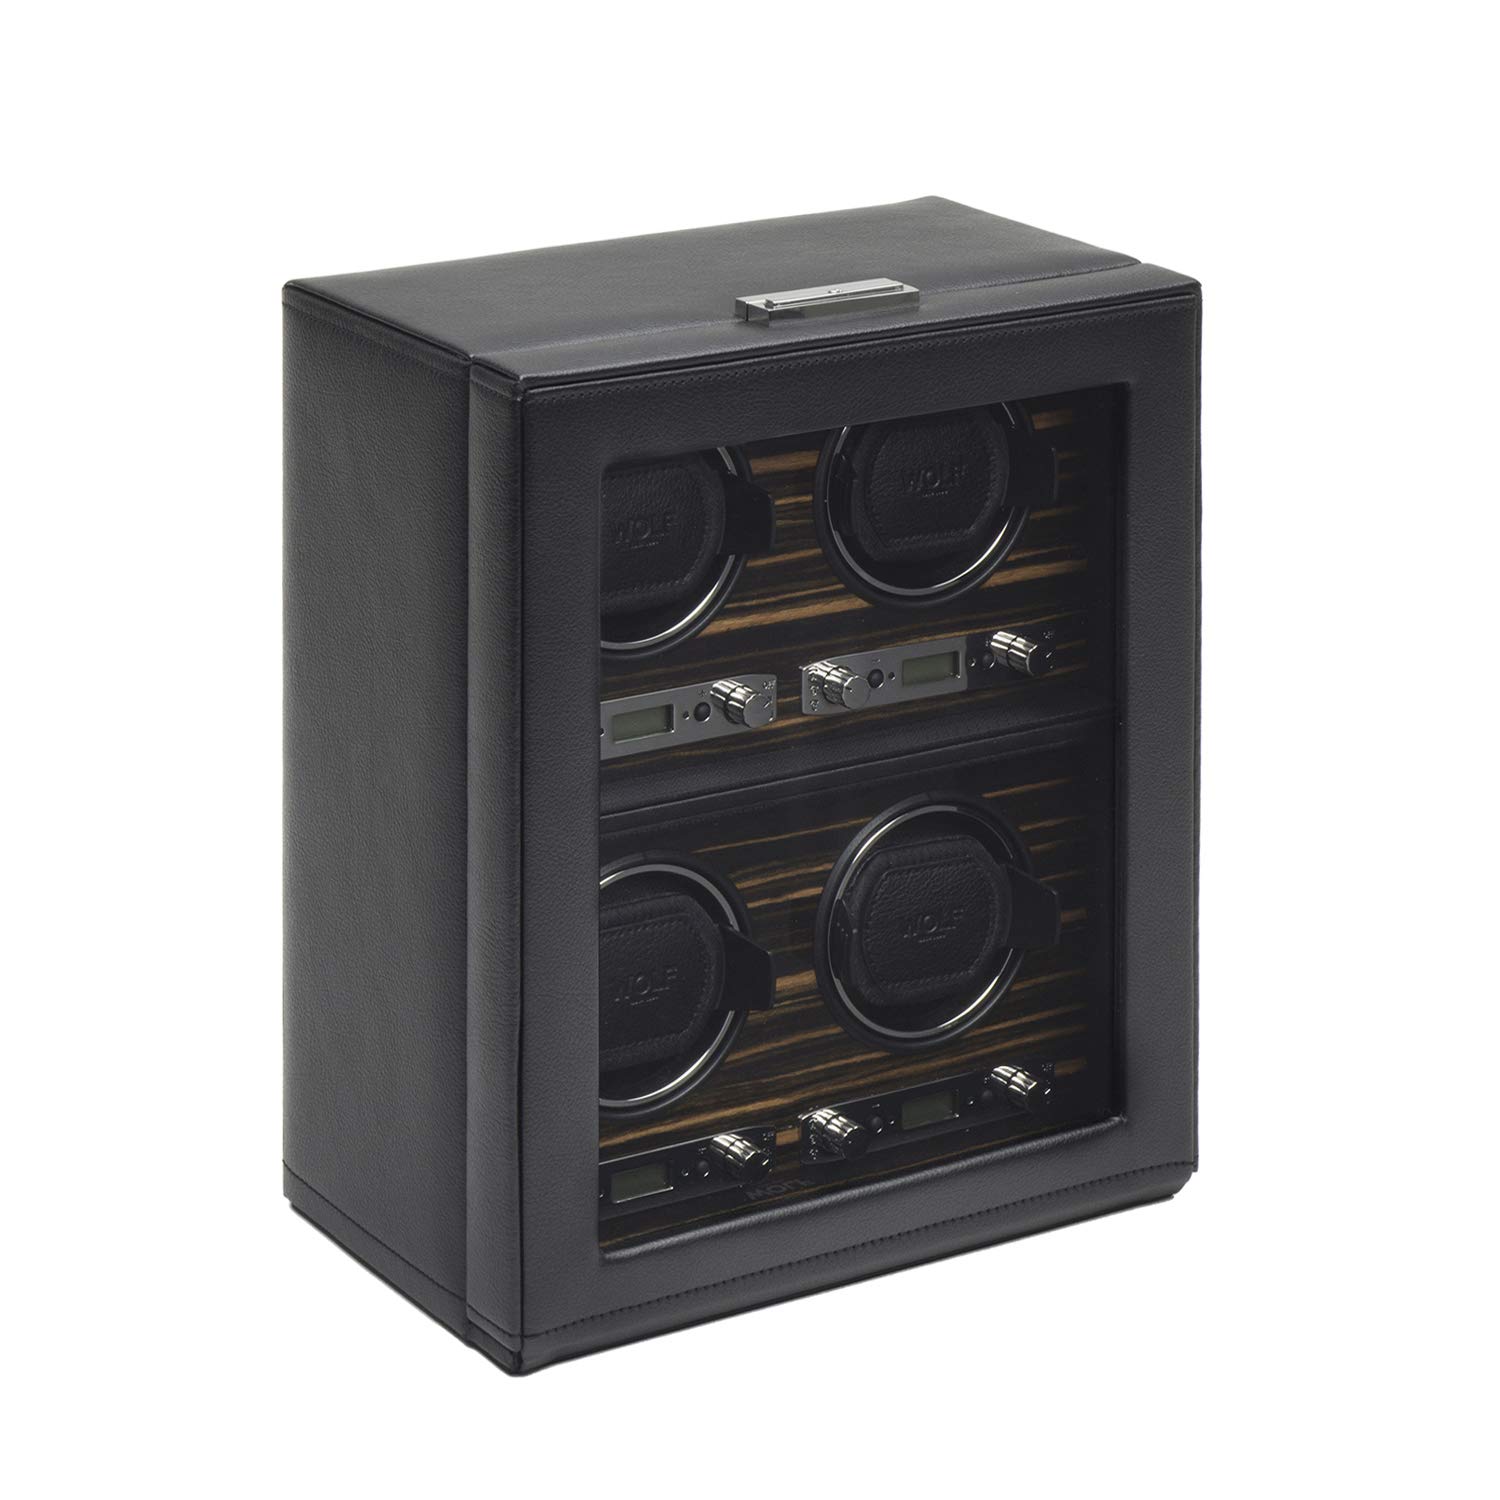 WOLF 459156 Roadster 4 Piece Watch Winder with Cover, Black